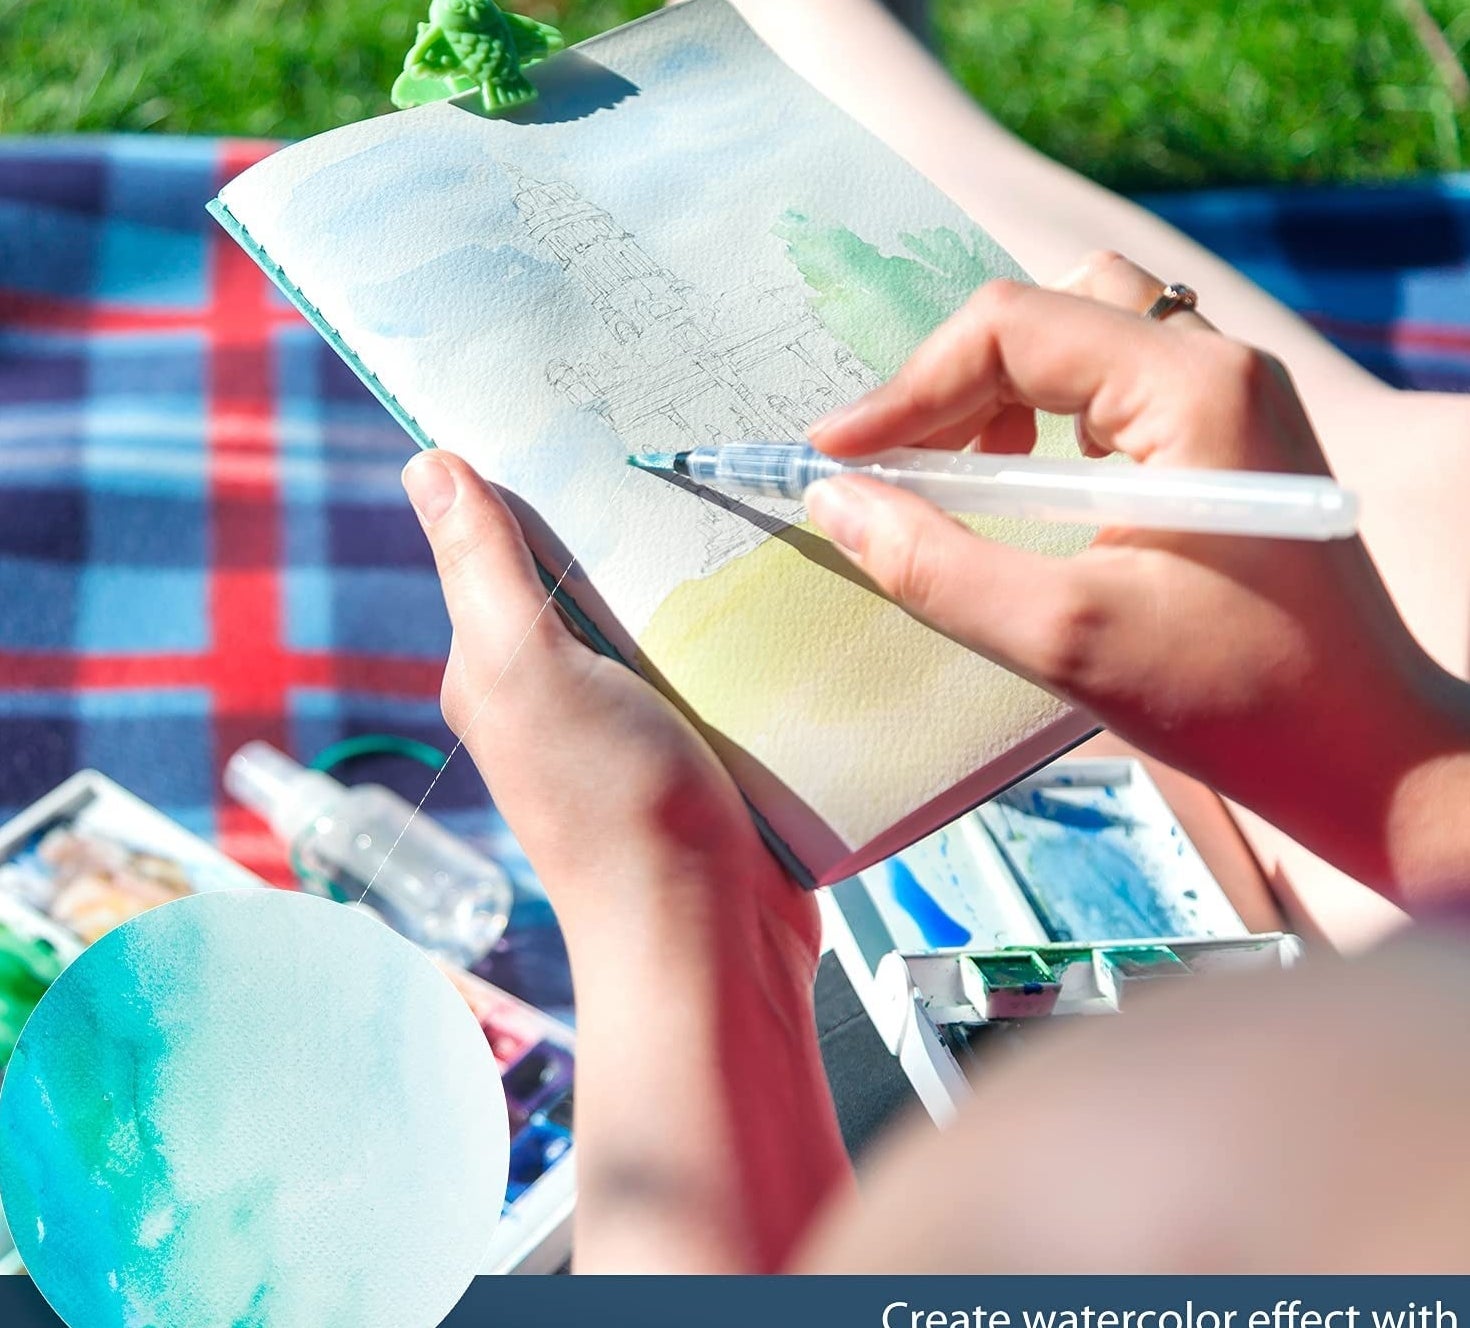 Someone using a watercolour brush pen on a sketch while outdoors on a flannel blanket